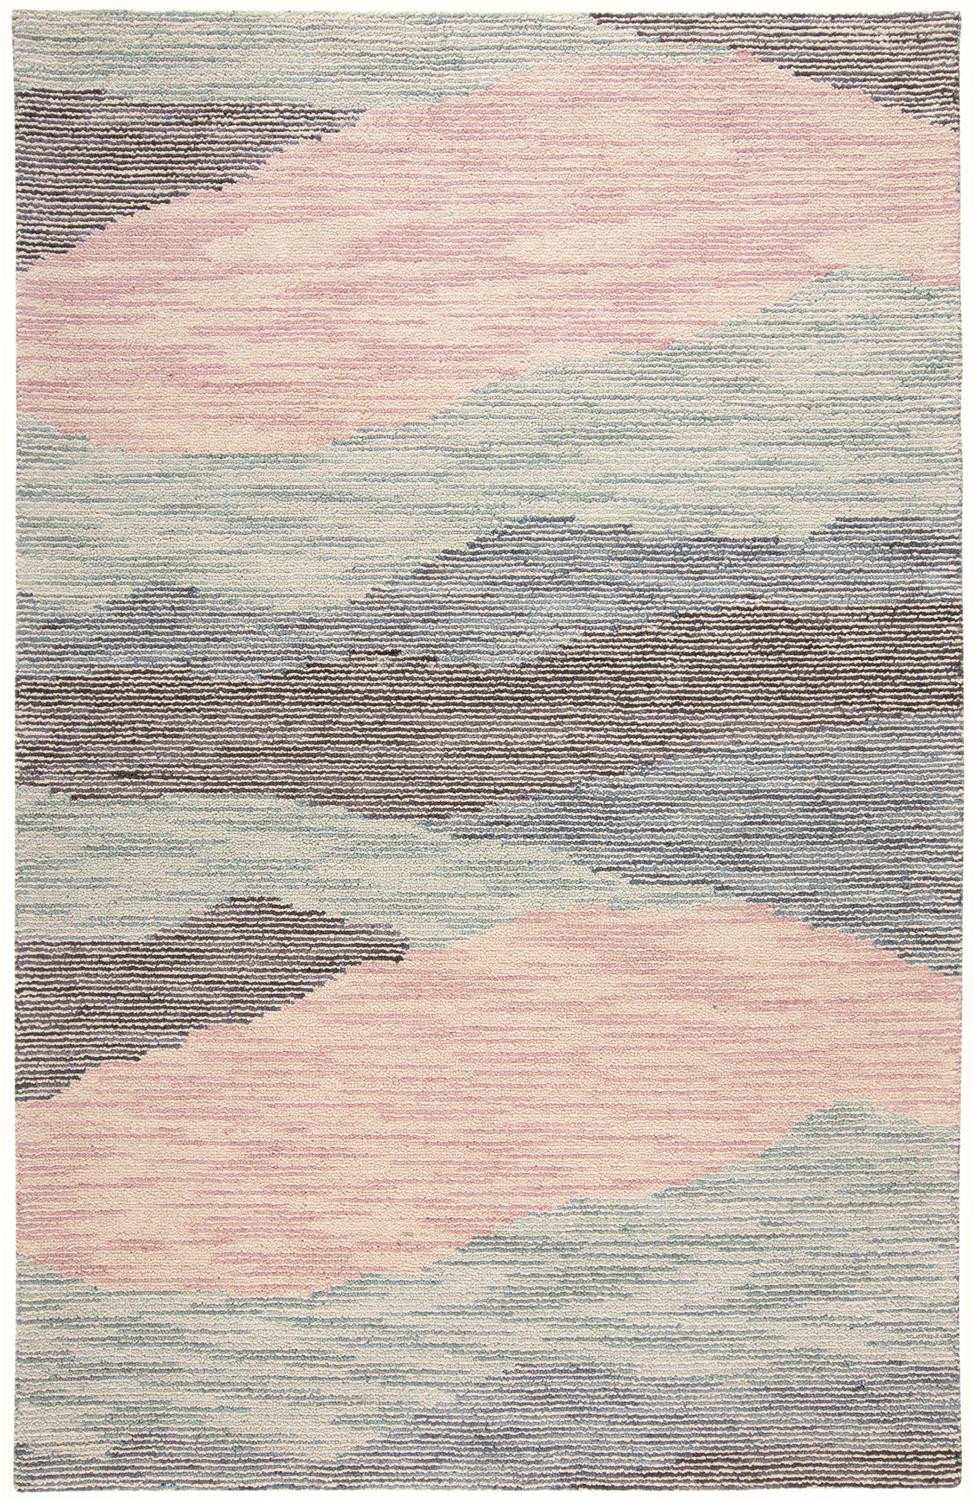 5' X 8' Pink Green And Blue Wool Abstract Tufted Handmade Area Rug-512280-1